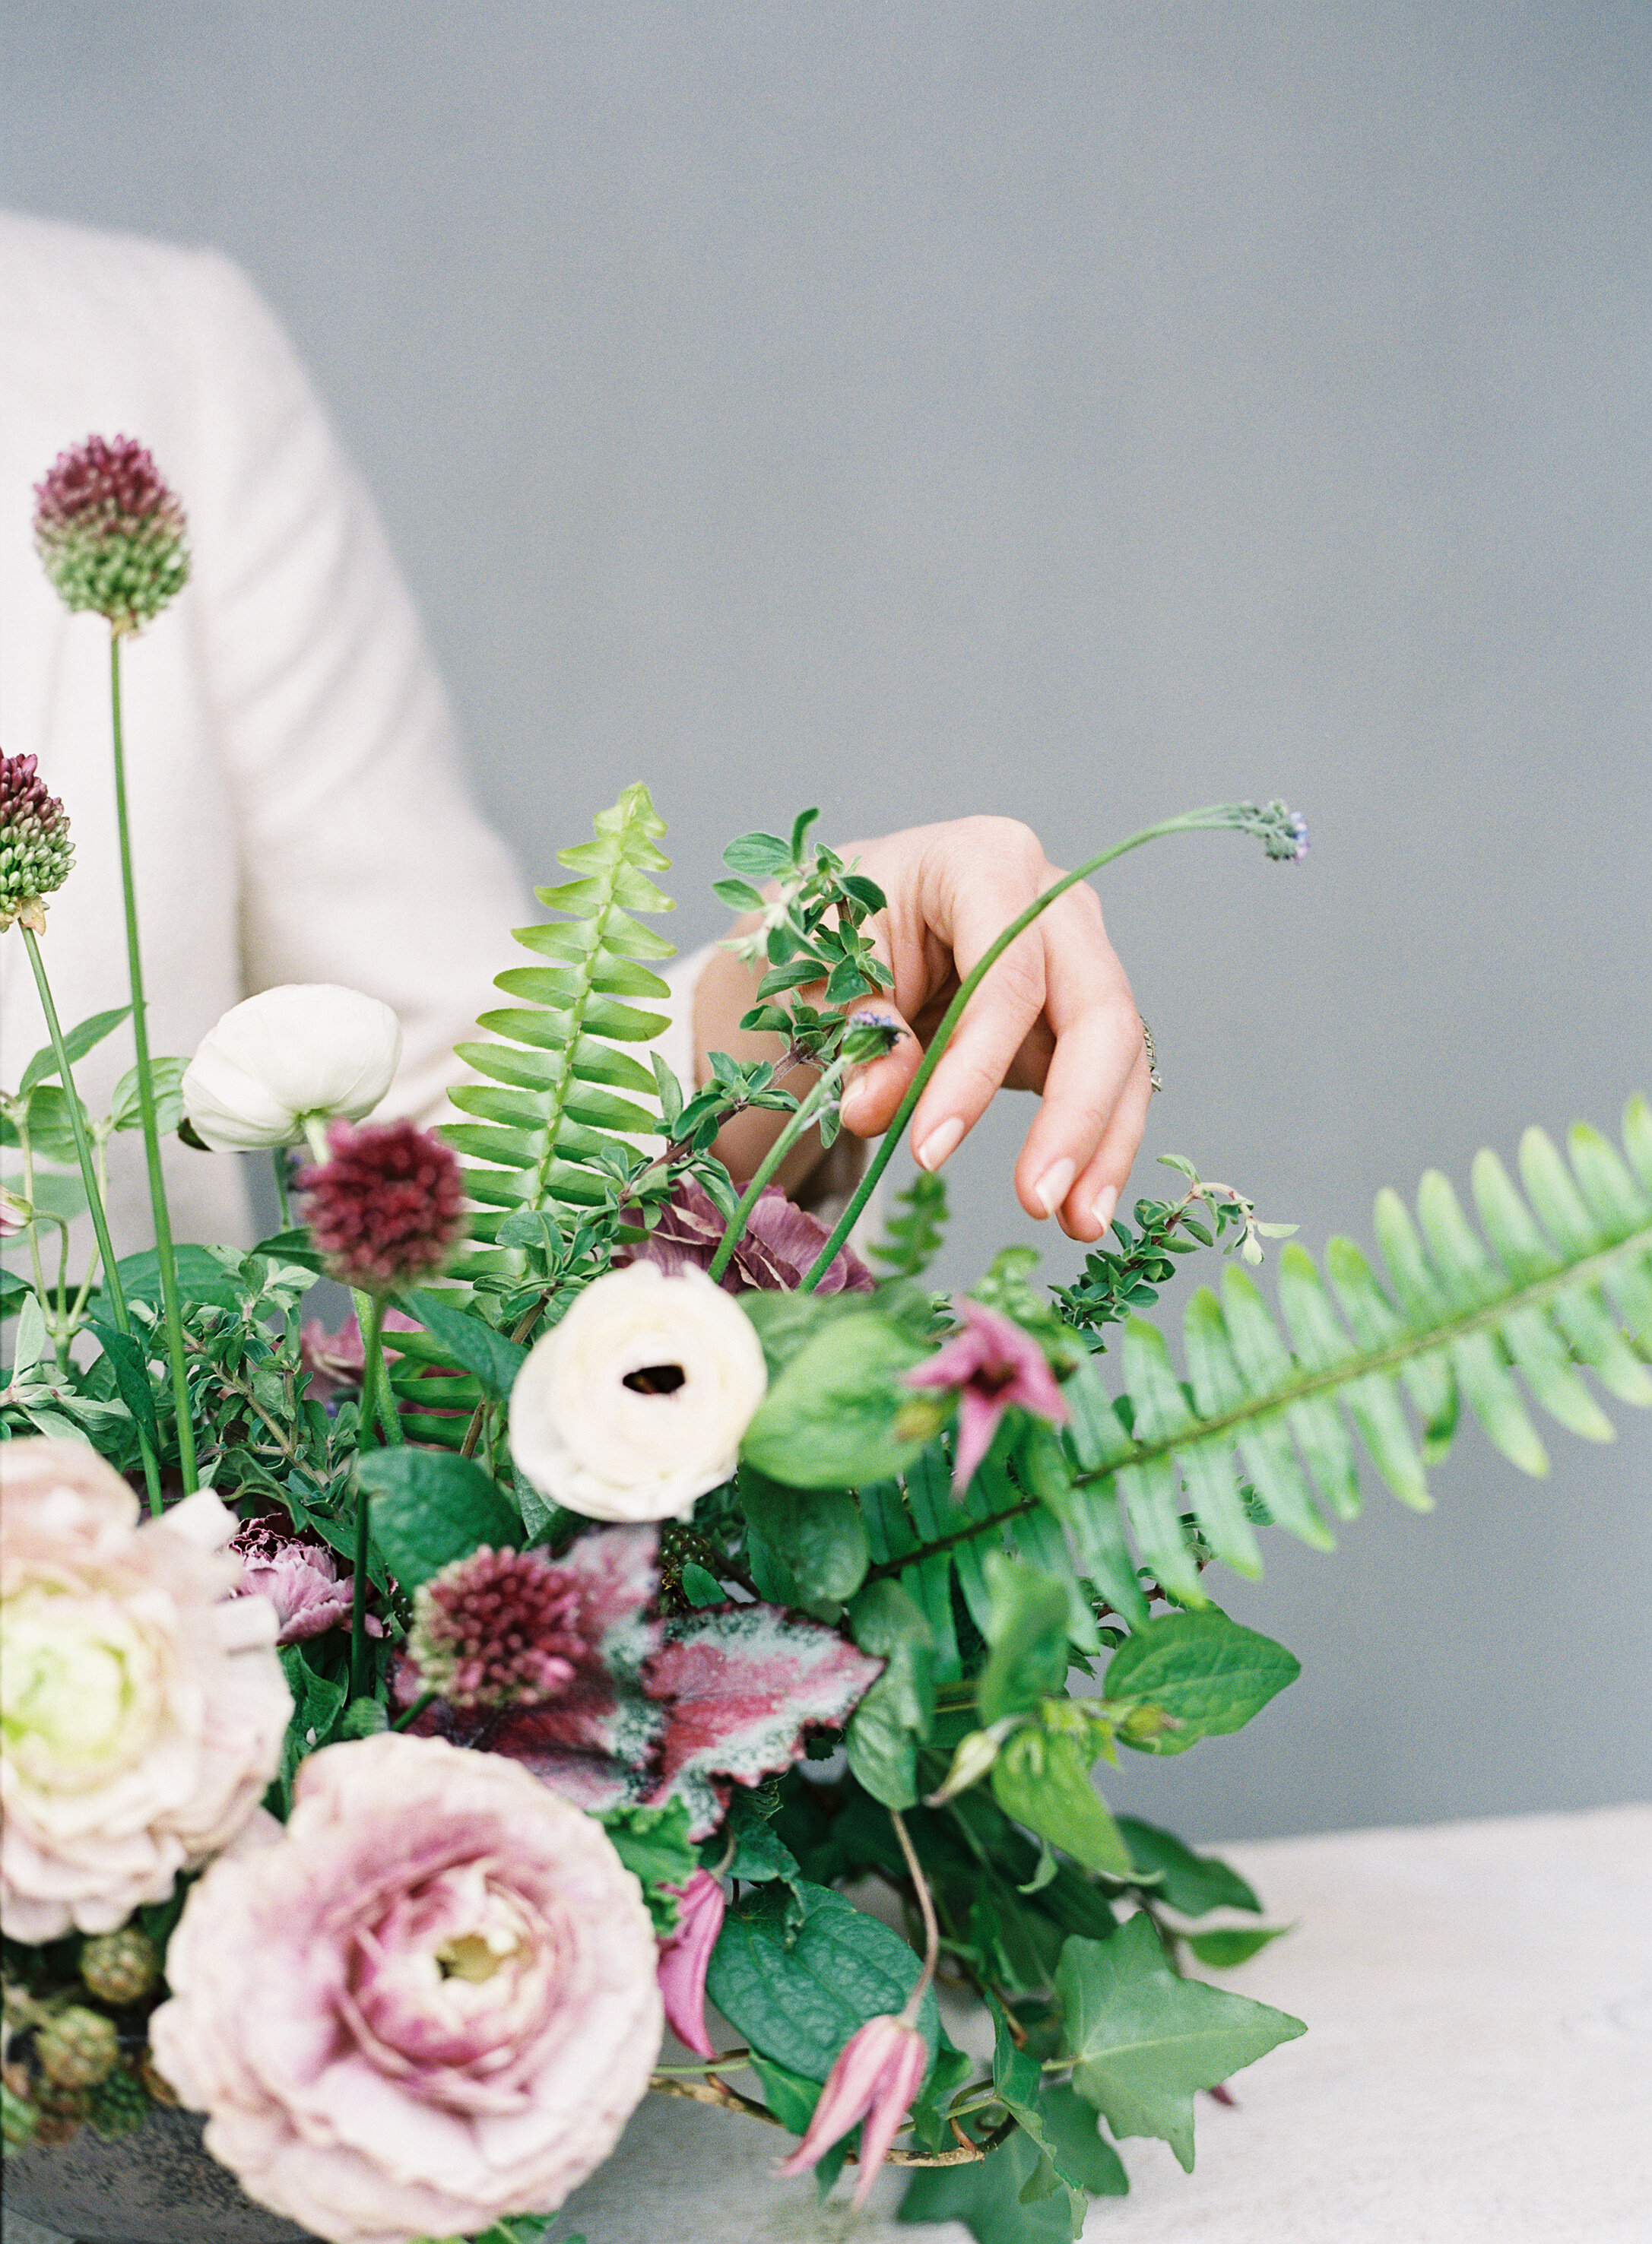 How to use a floral frog for a low arrangement